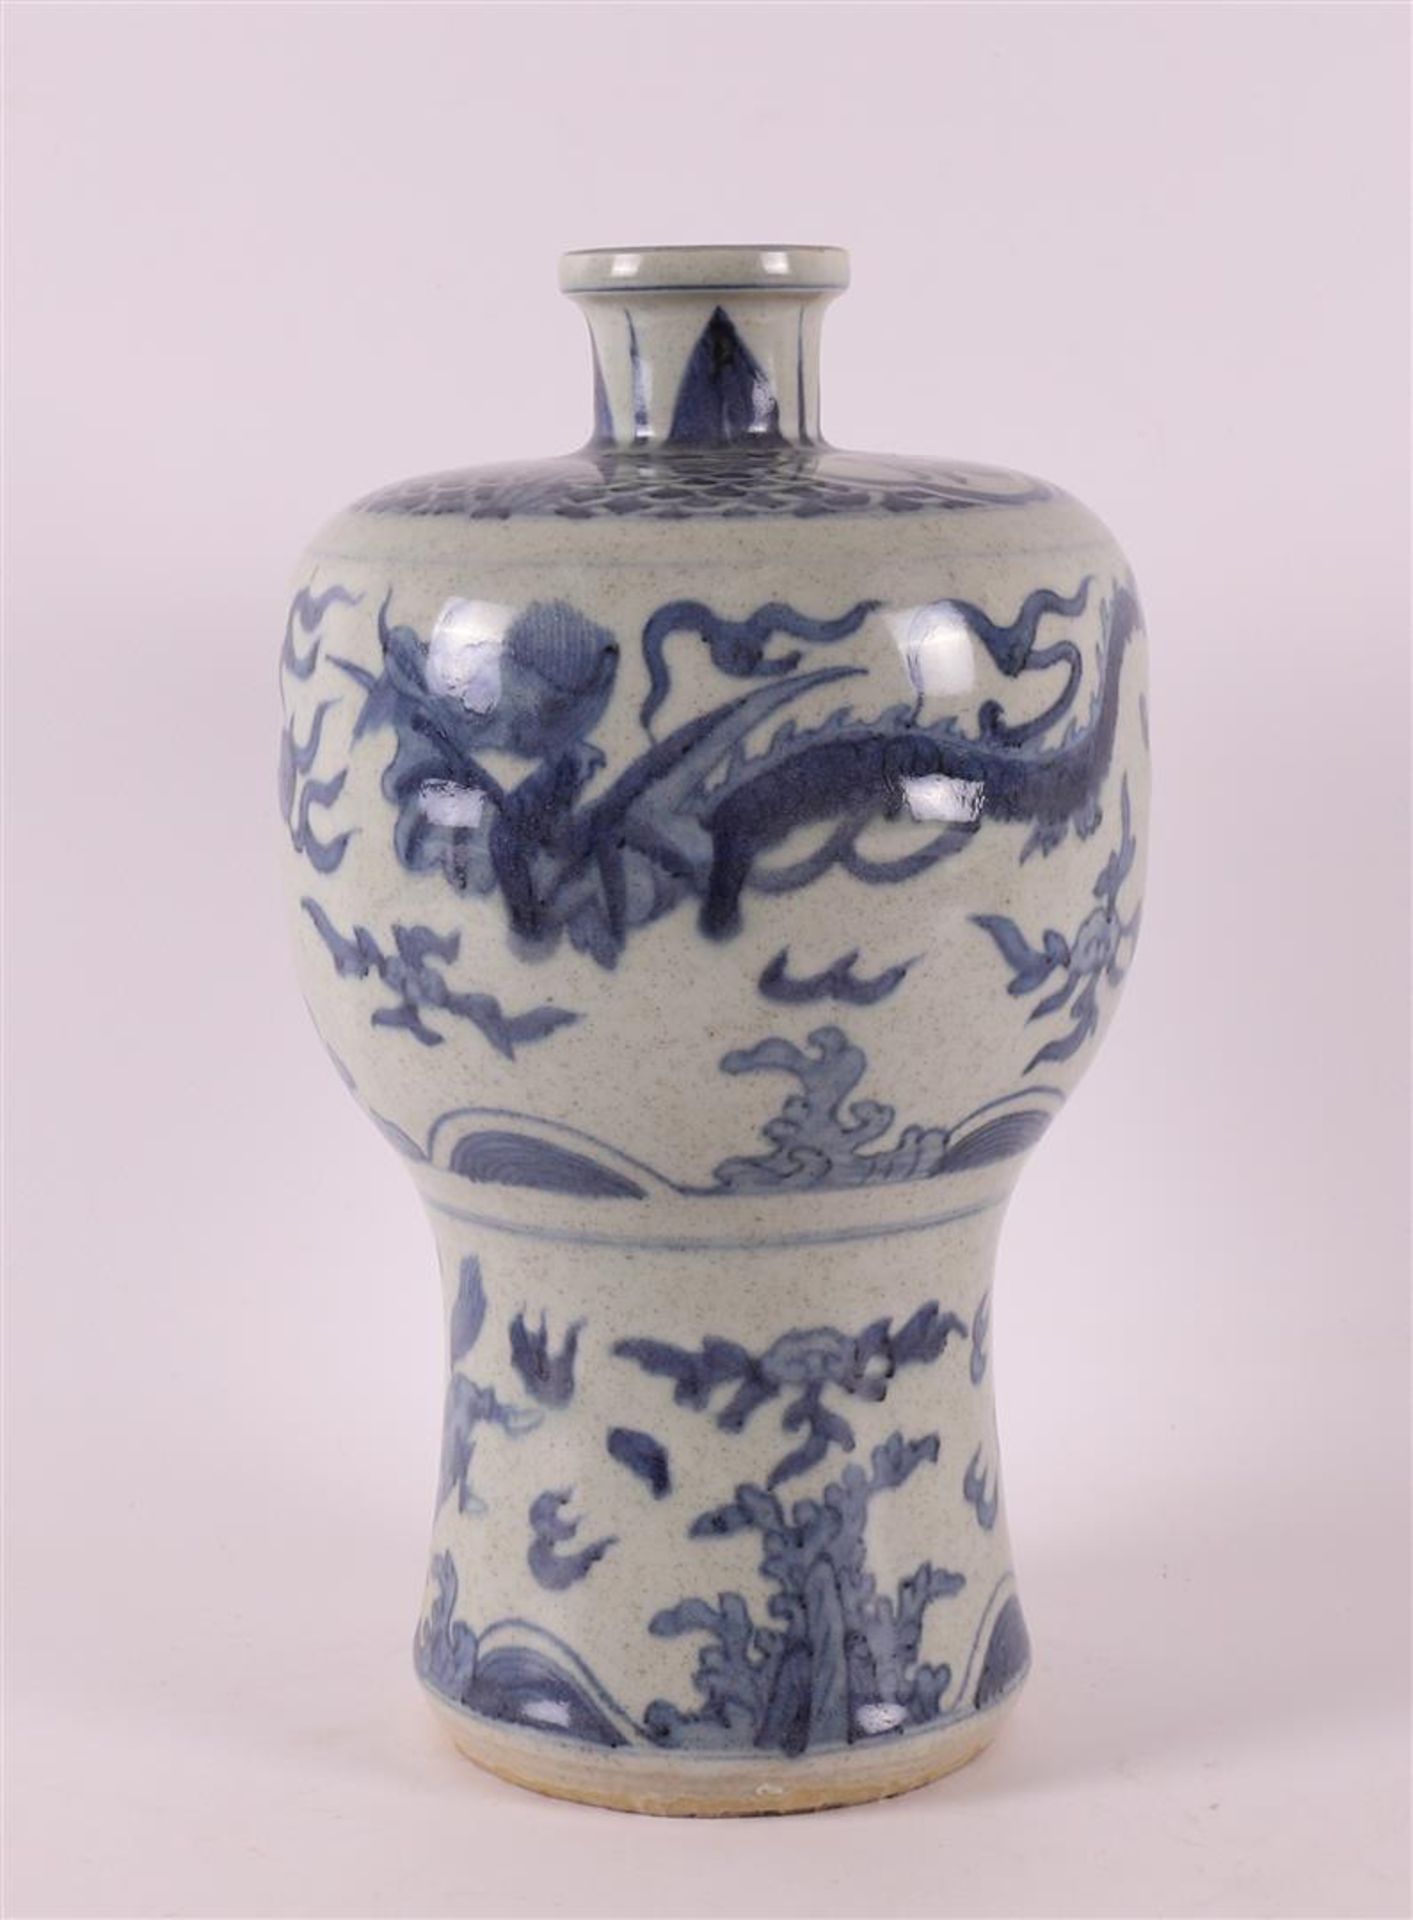 A blue/white porcelain Meiping vase, China, 2nd half 20th century. - Image 2 of 7